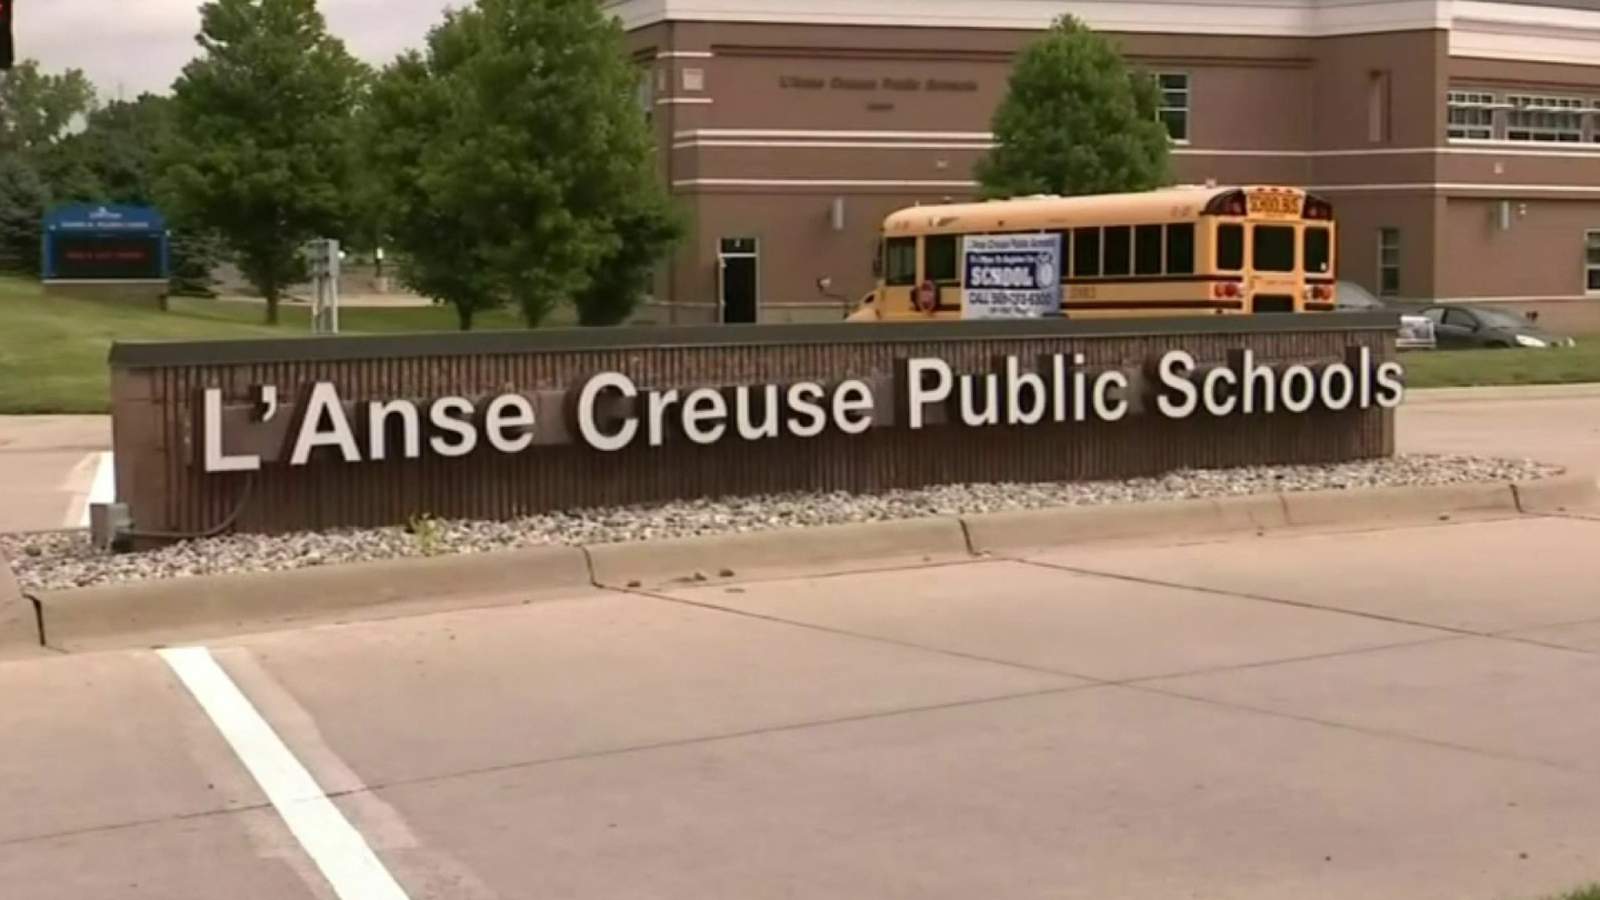 How do students feel about L’Anse Creuse’s decision on in-person learning?